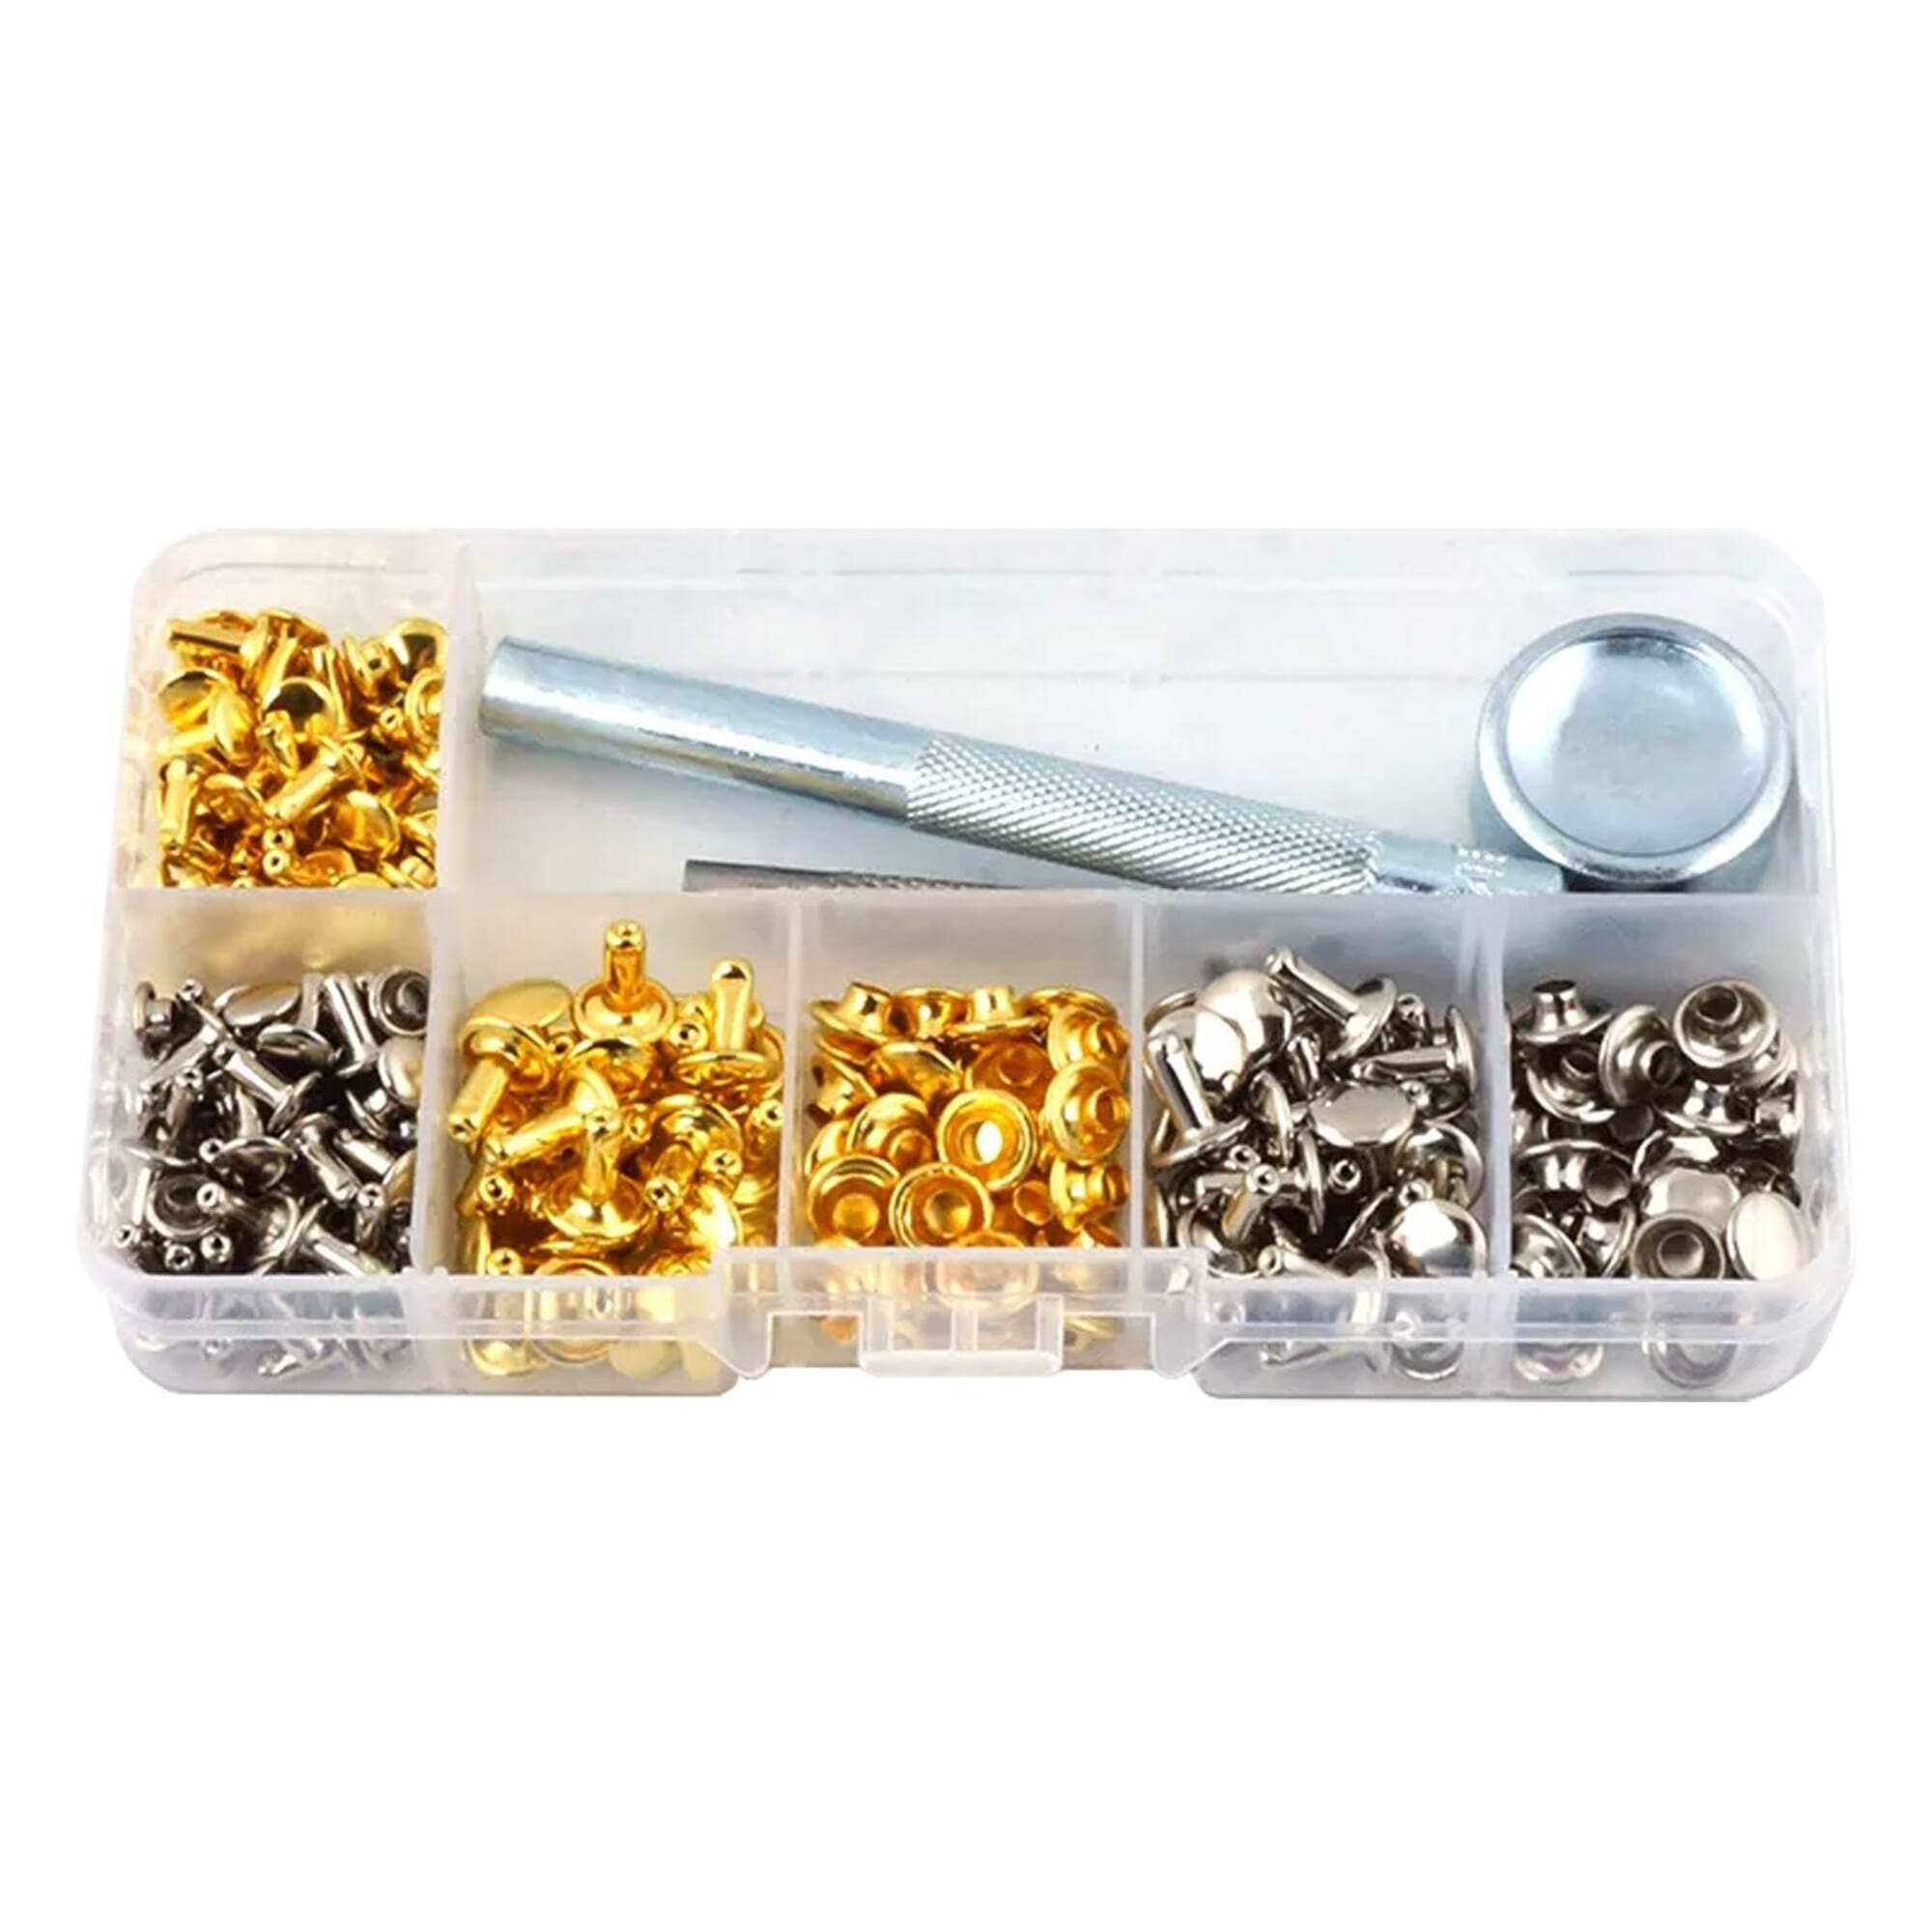 Generic Brand Leathercraft 120pcs Gold Silver Color Copper Rivet Fastener Installation Tool Kit, with Setter and Hole Punch, for Leatherworking